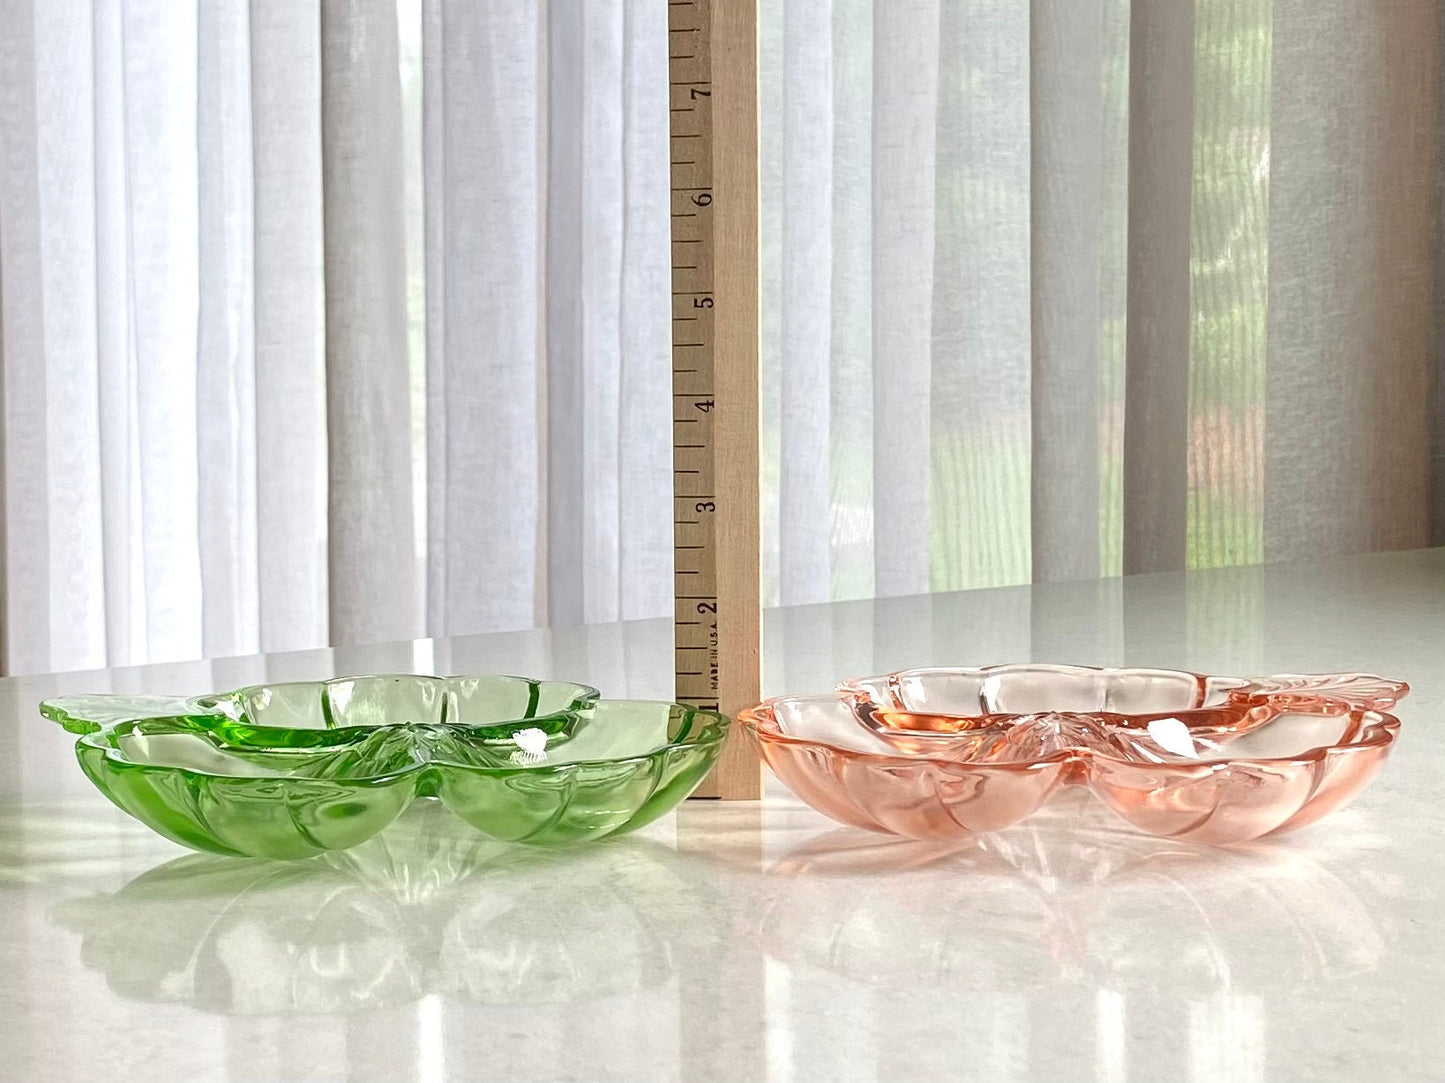 Vintage Jeannette Doric Clover Three Part Dishes (circa 1935 - 1938) - Uranium Green and Pink Available